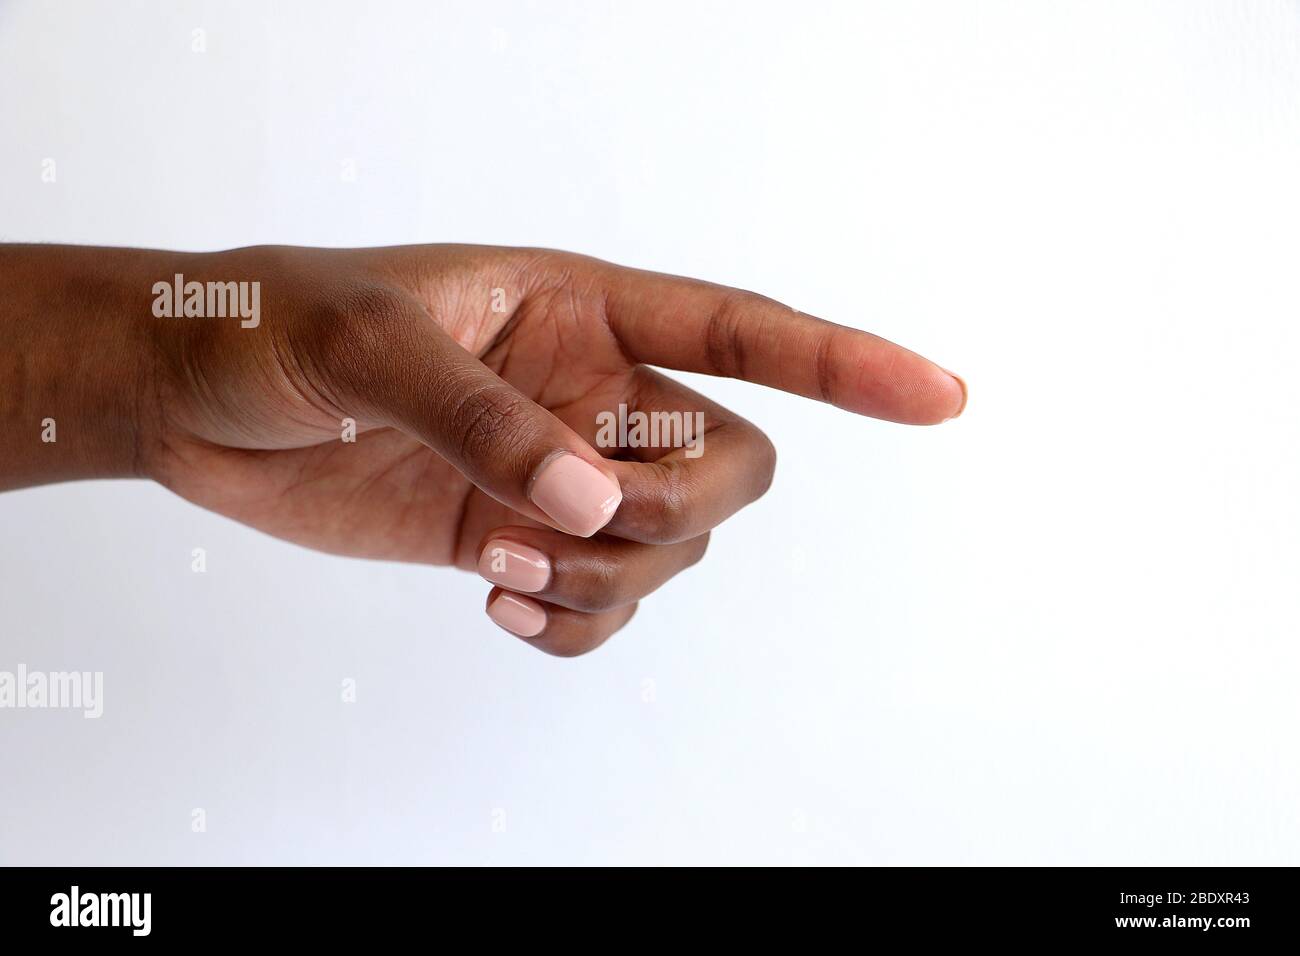 Isolated female black African Indian manicured hand pointing gesture against a white background Stock Photo